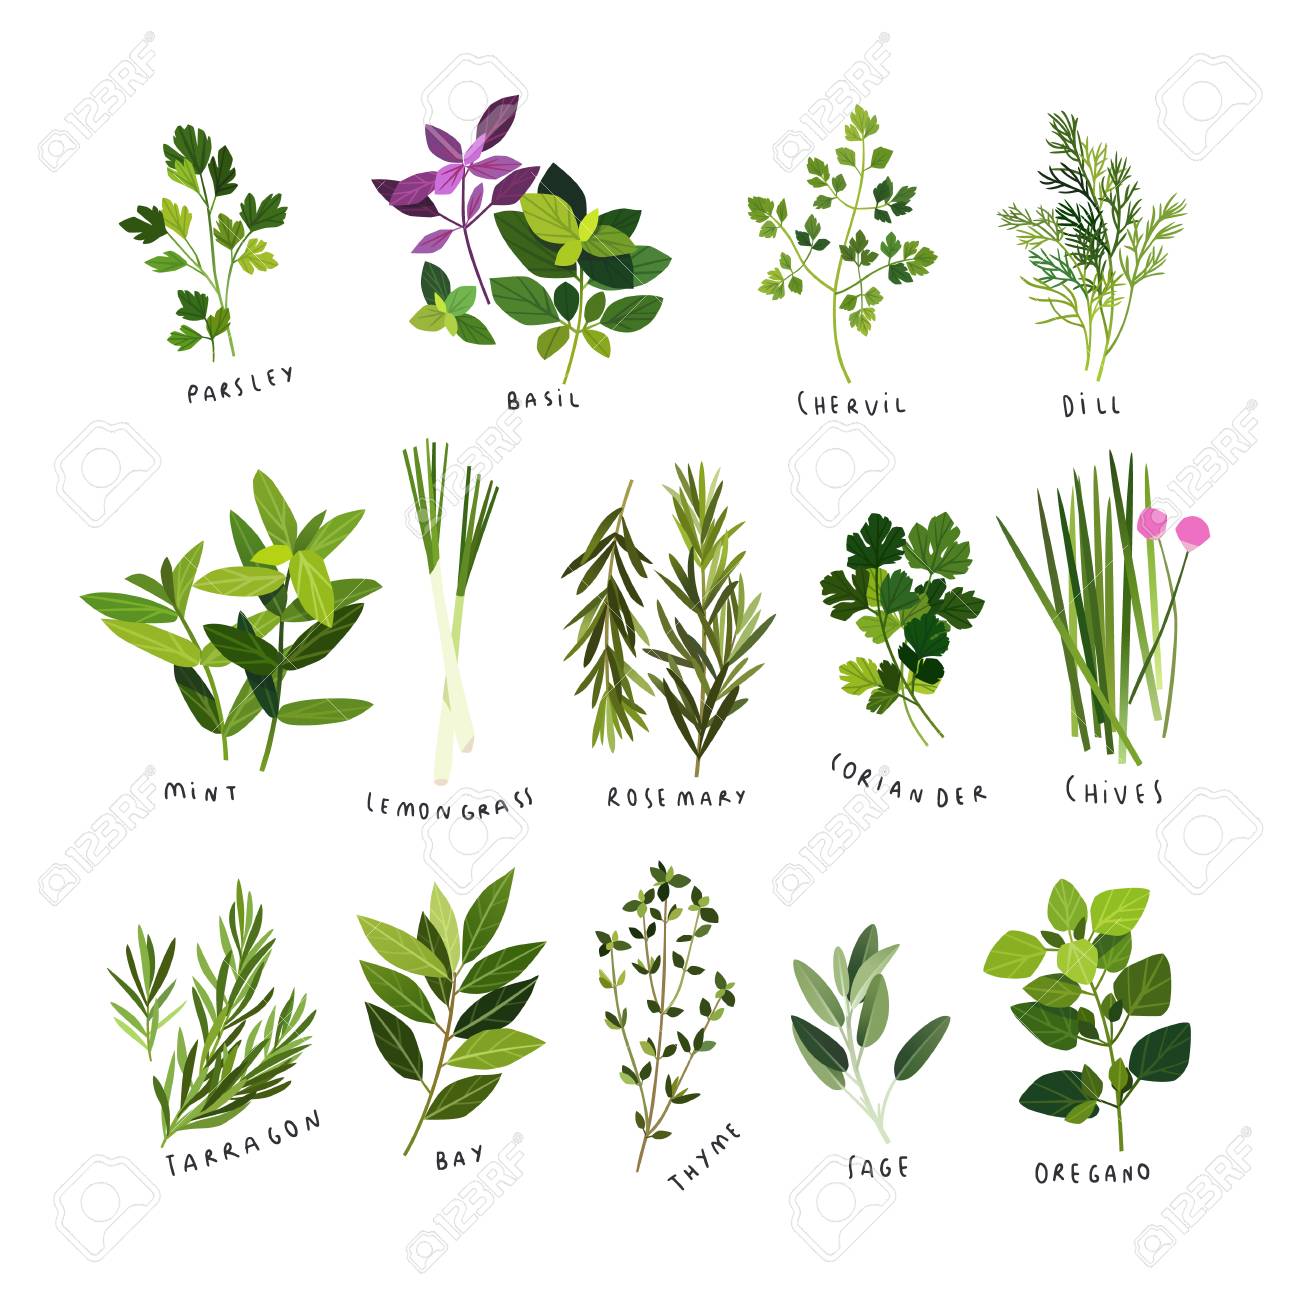 Clip art illustrations of herbs and spices such as parsley, basil,...